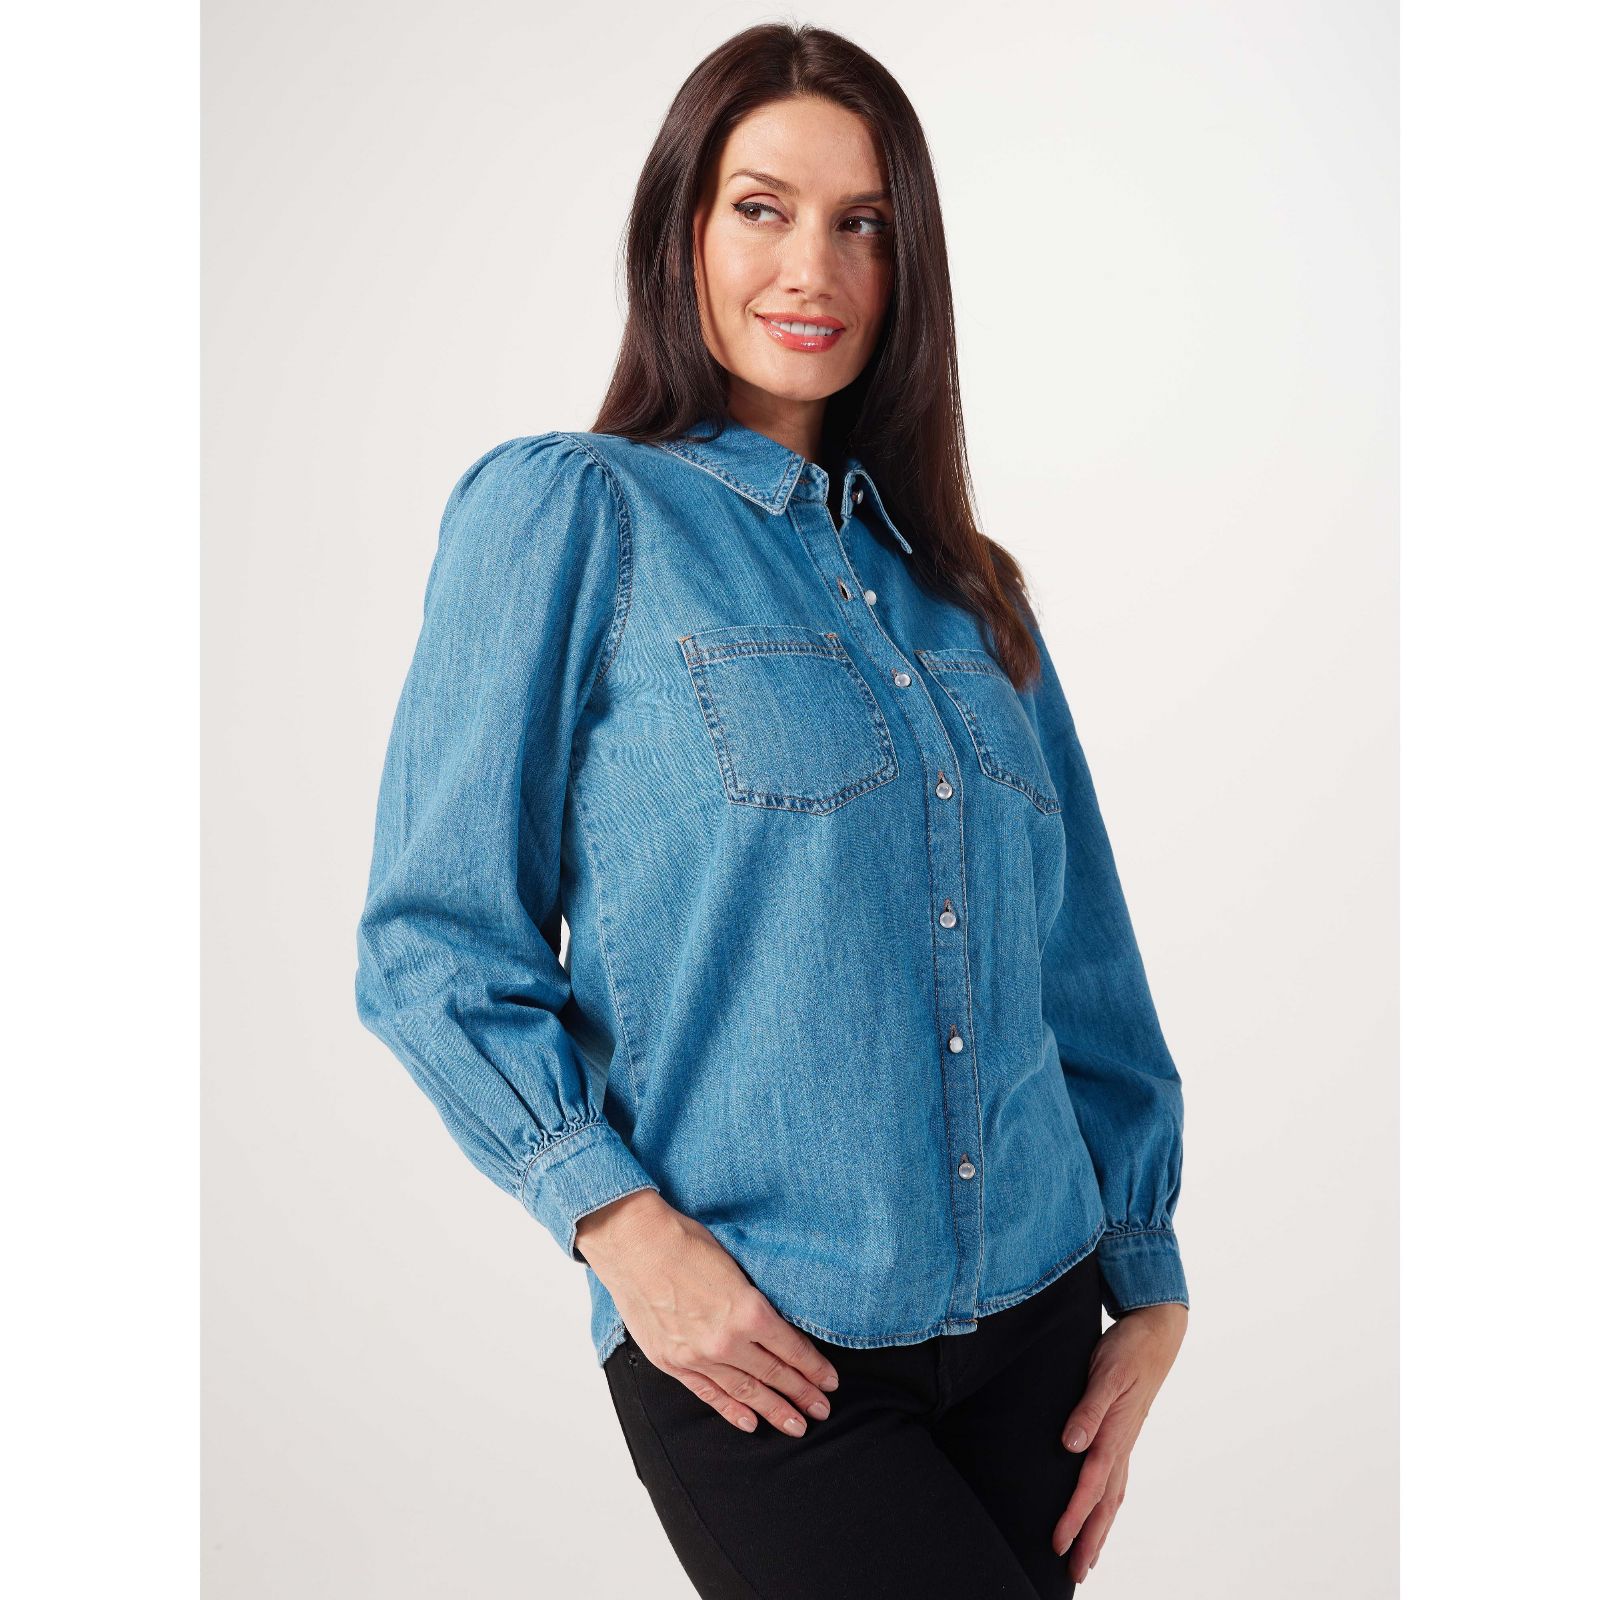 Finery Chambray Top with Collar - QVC UK